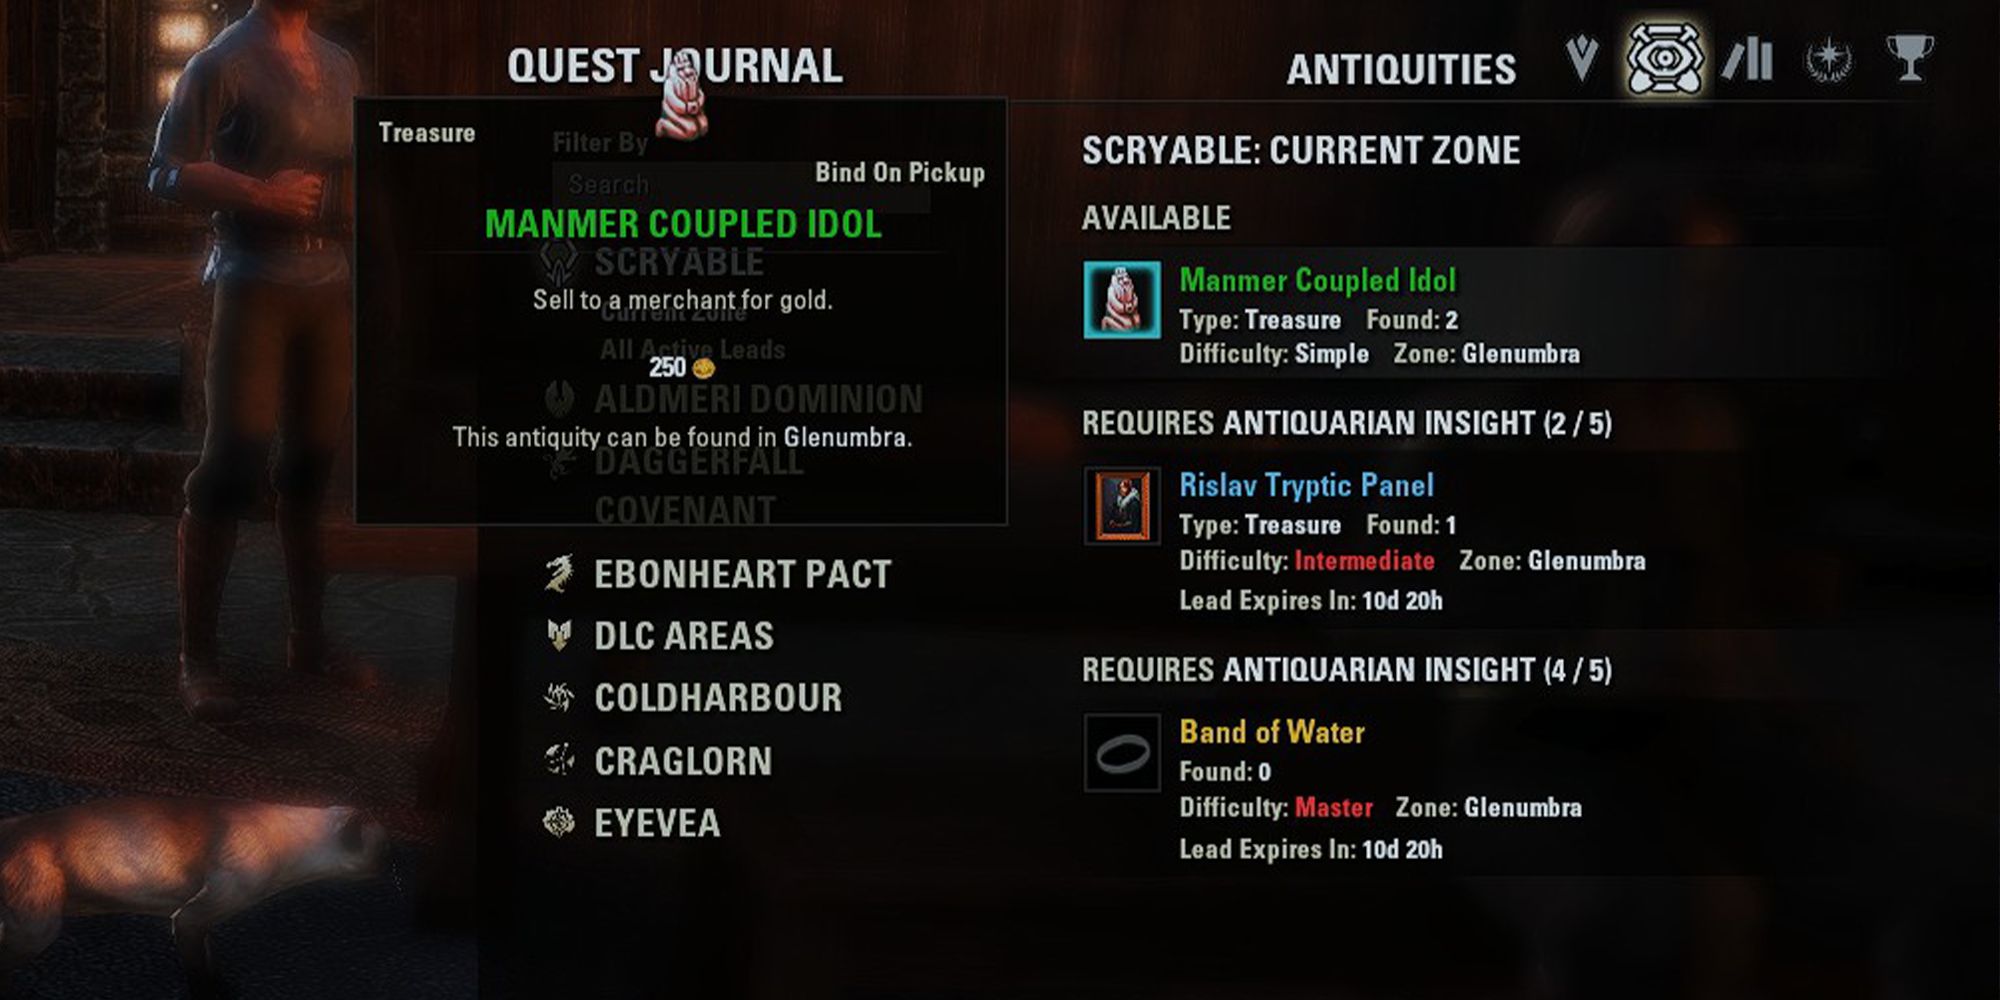 ESO Antiquities Journal with three leads, the Band of War, a painting, and an idol.